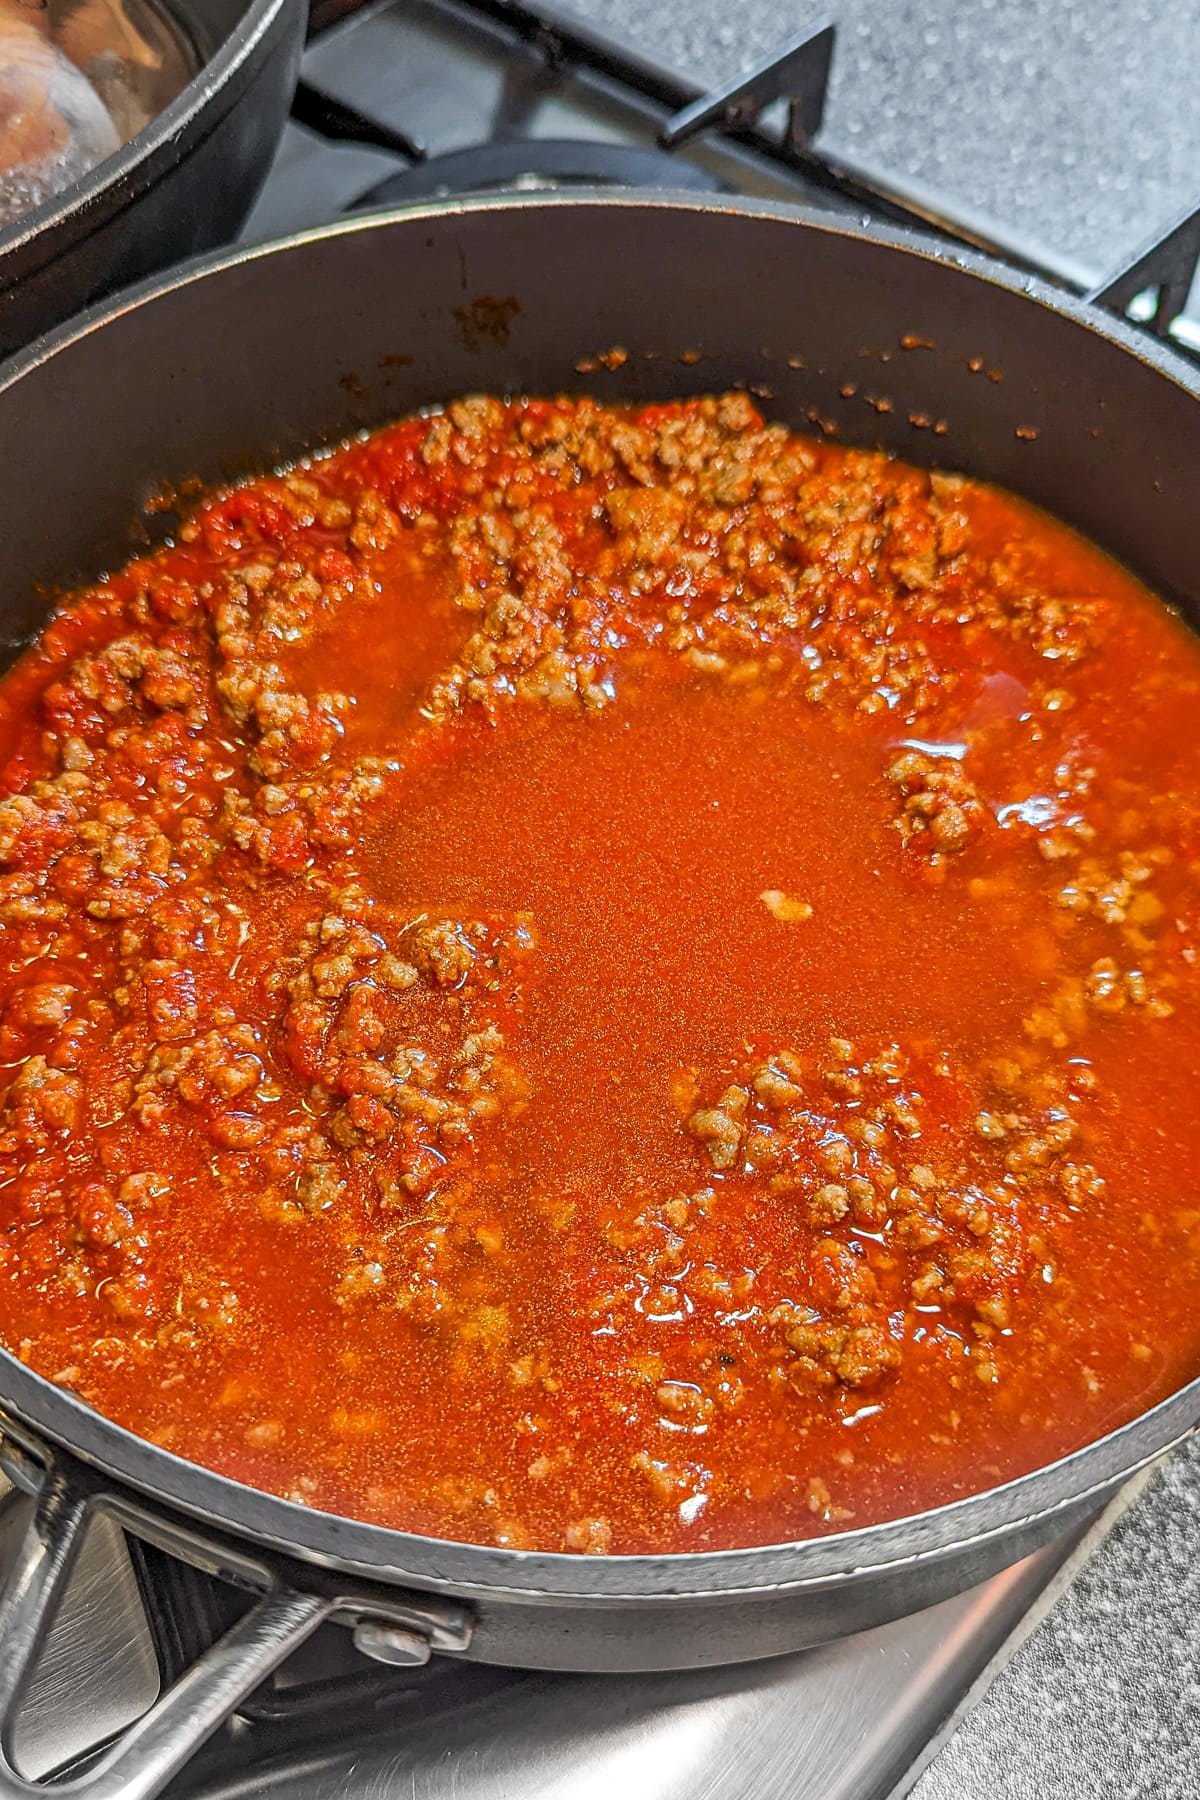 Beef chili in a pan on the stove.